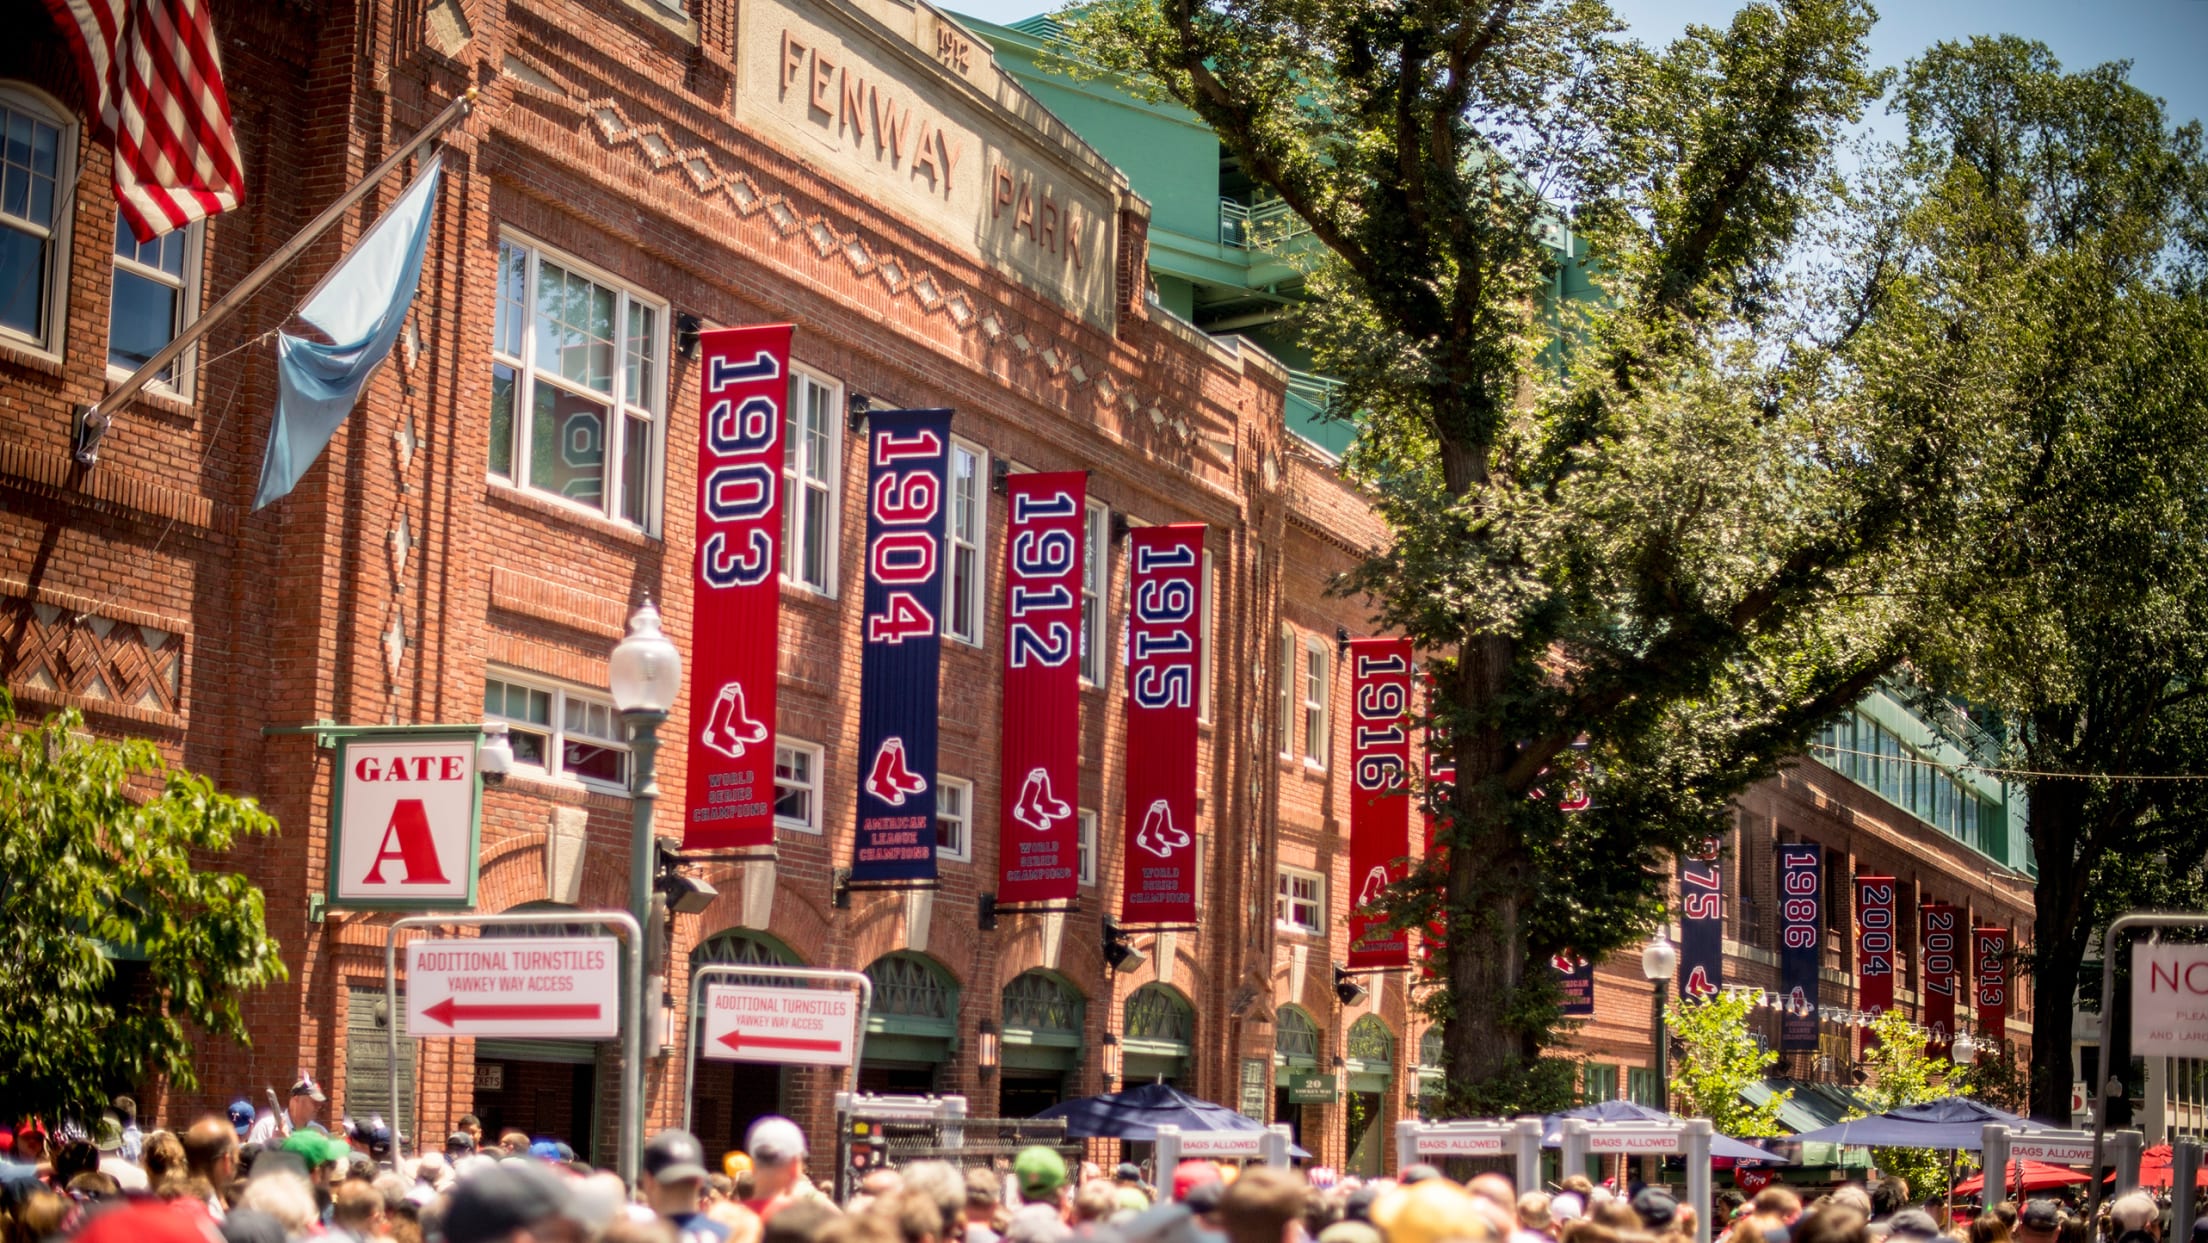 Fenway Park: Home of the Red Sox